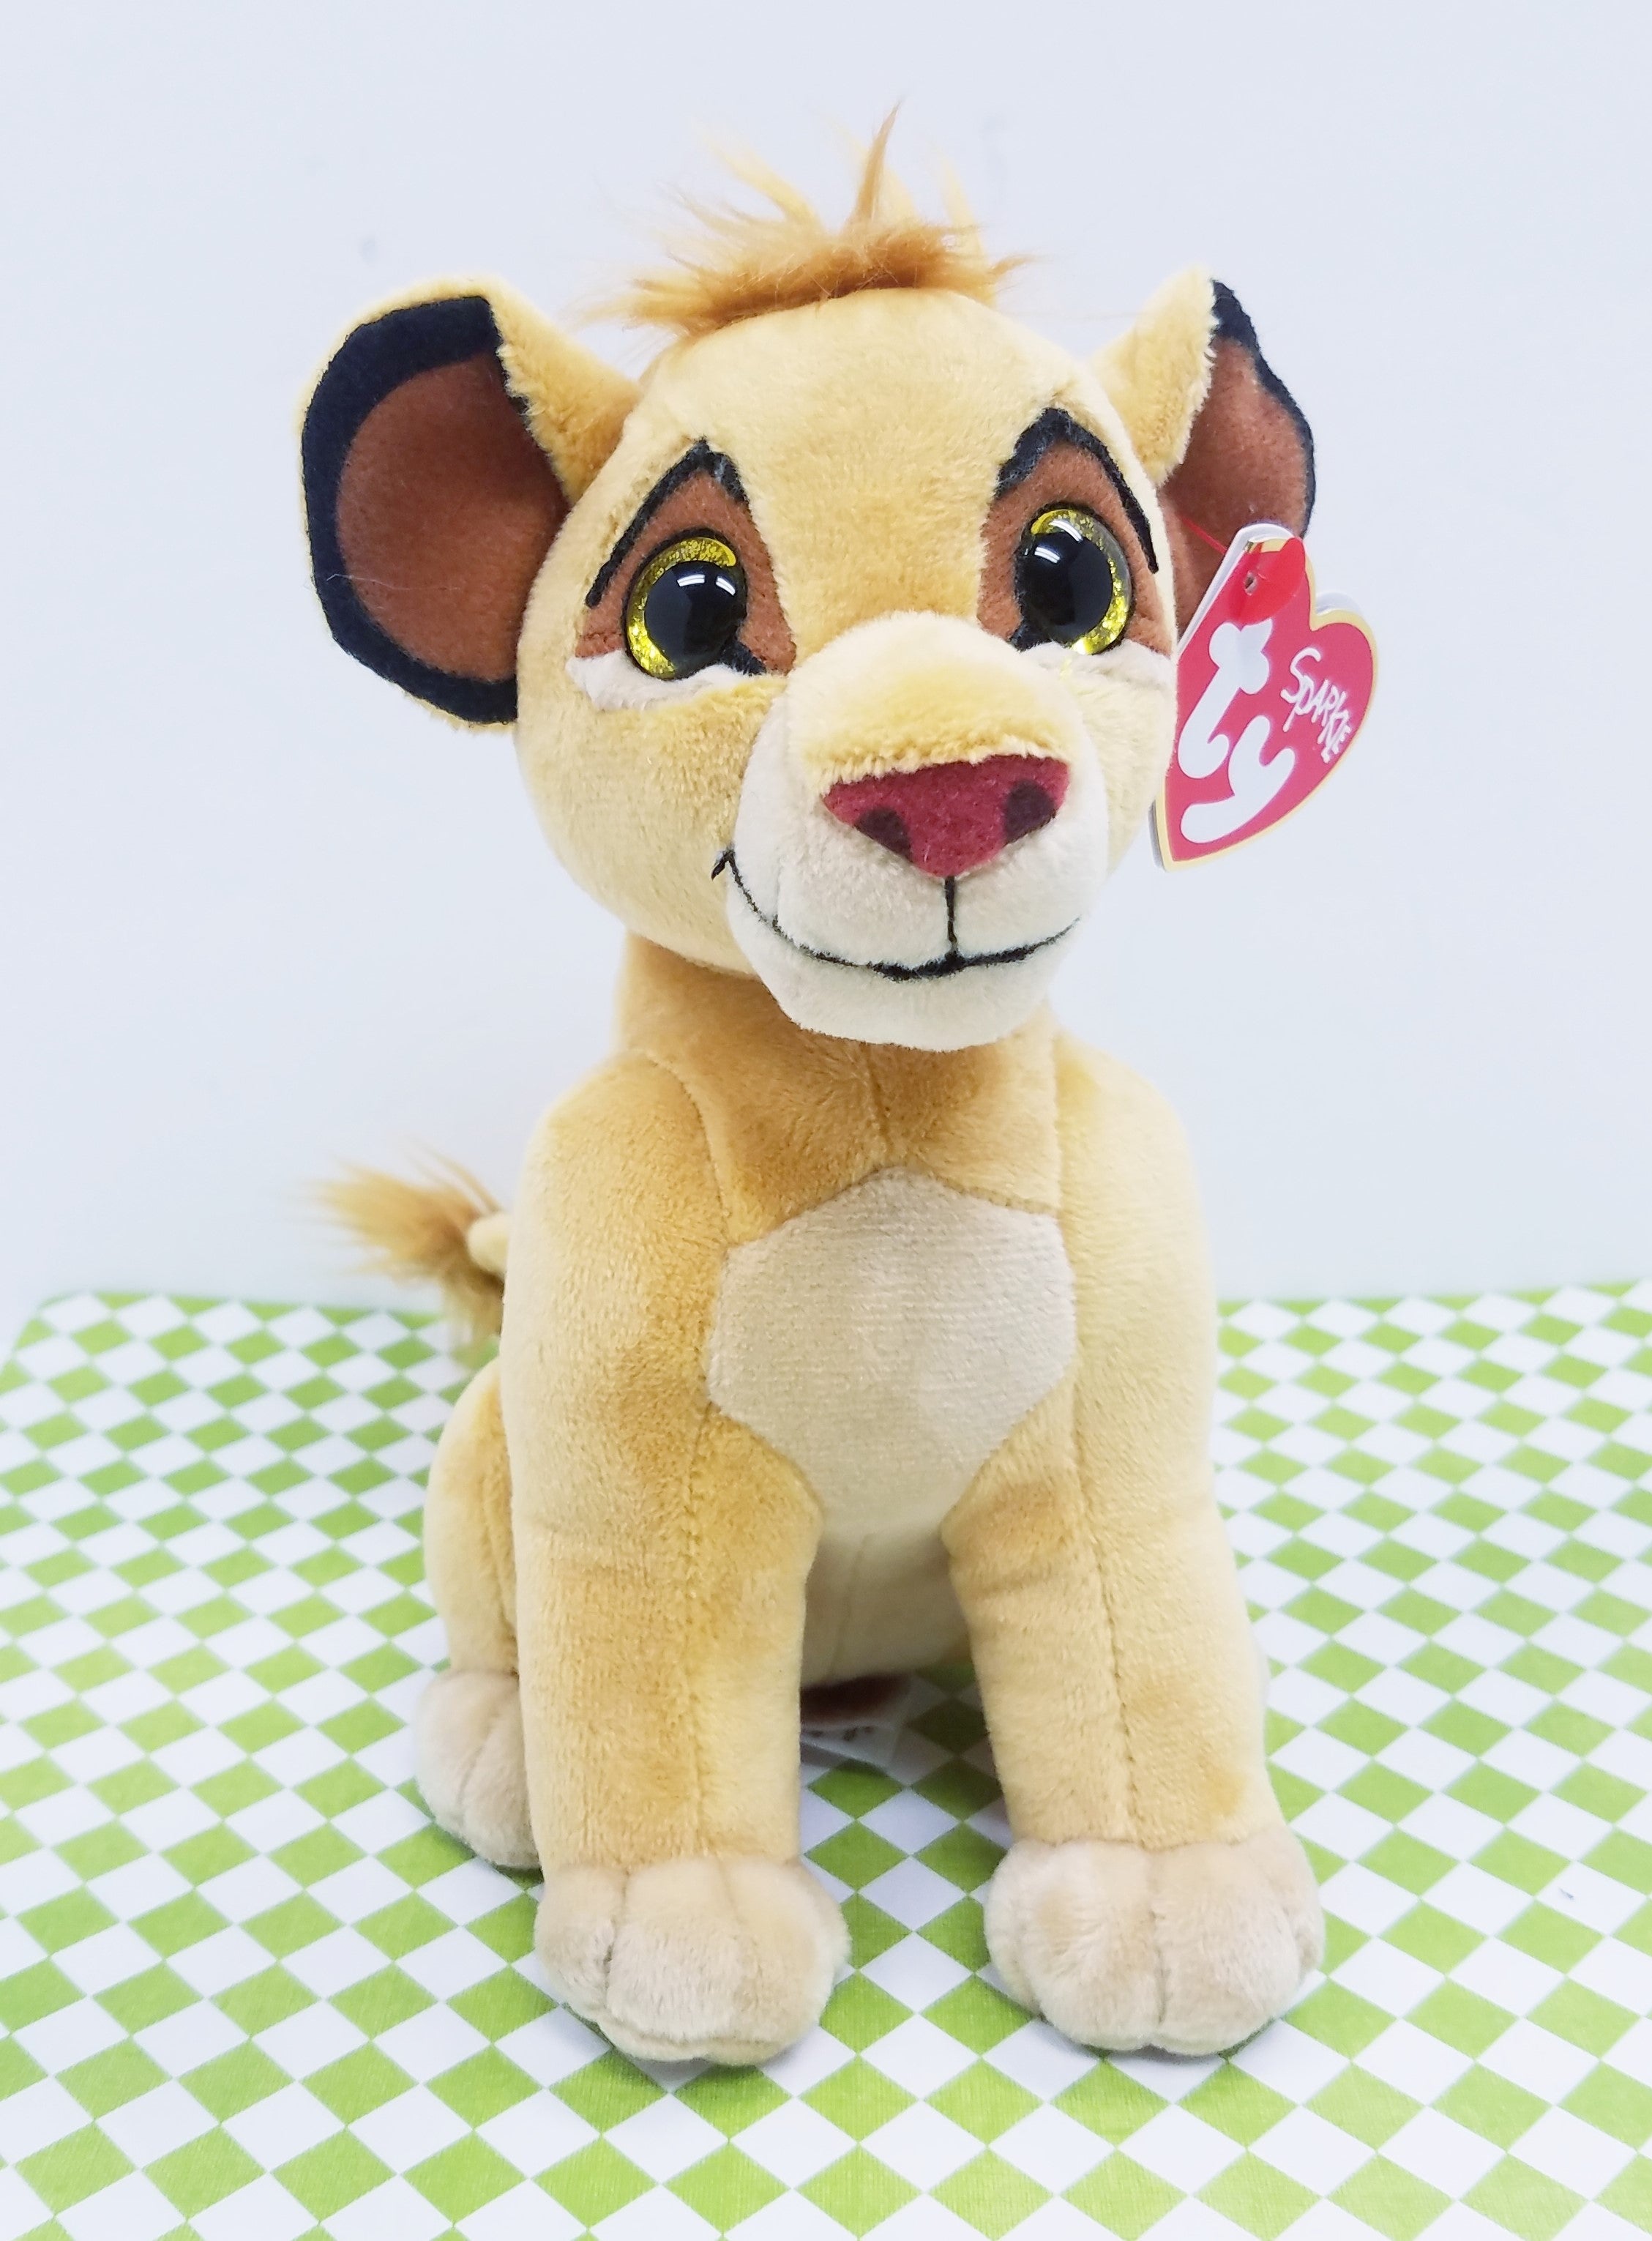 TY Beanie Baby – Simba from The Lion King